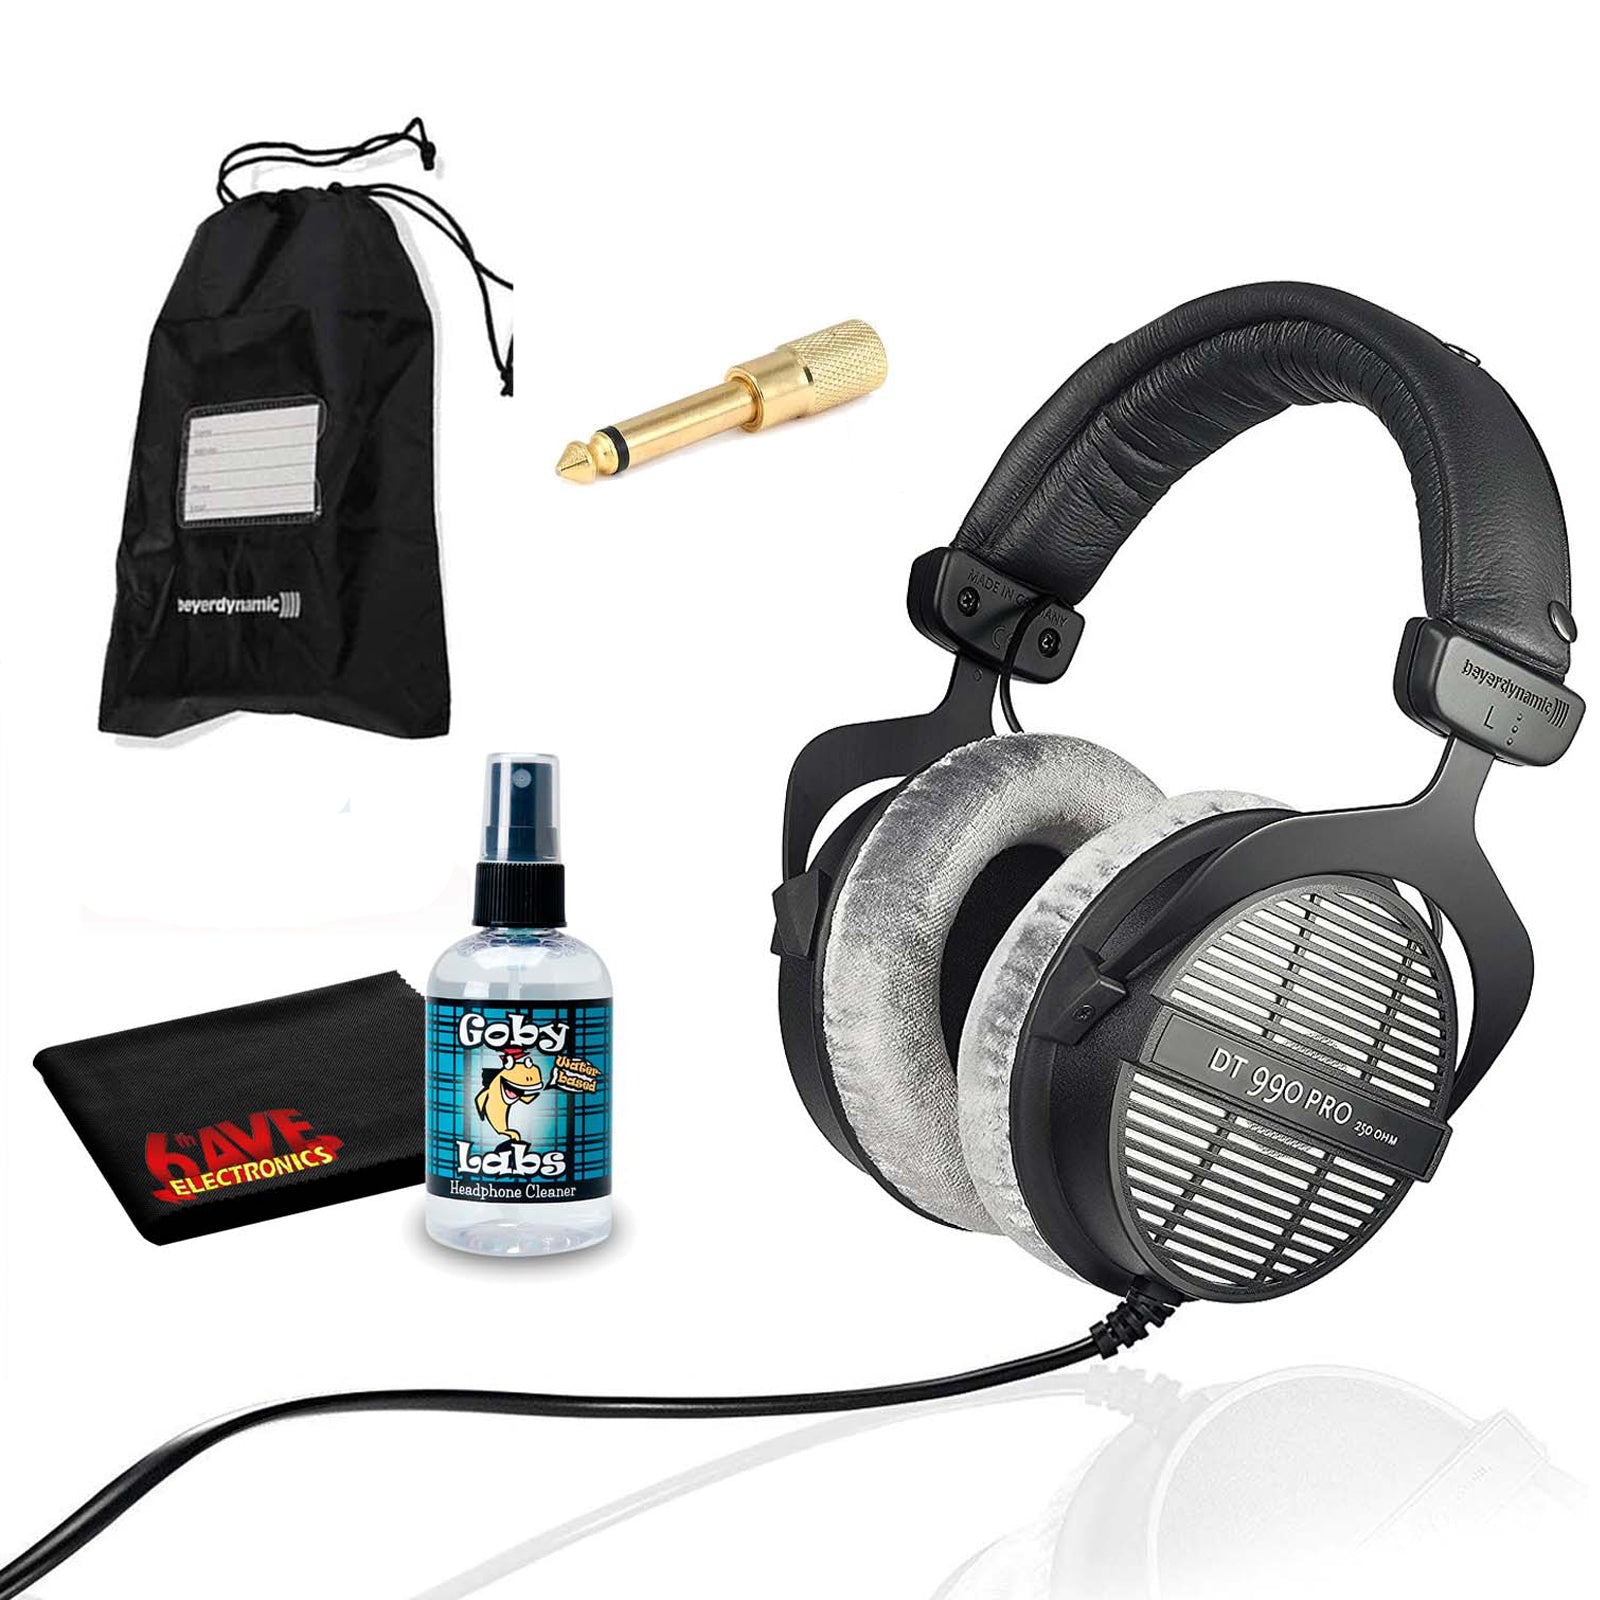 Beyerdynamic DT 990 Pro Studio Headphones with 6Ave Headphone Cleaning Kit and Extended Warranty Bundle